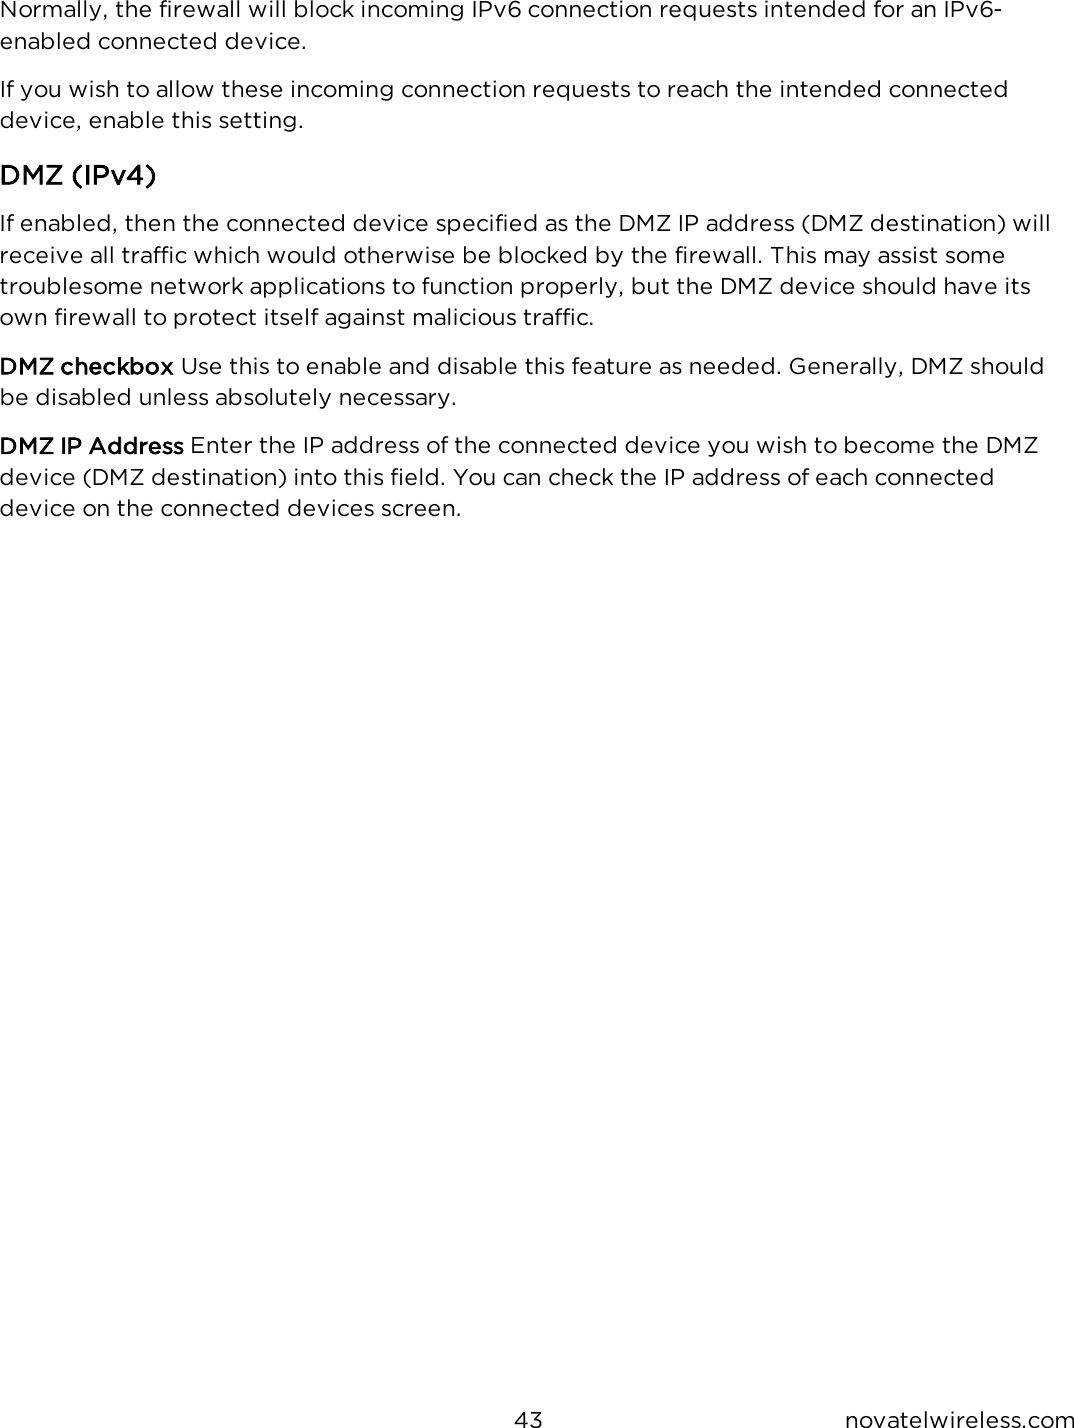 43 novatelwireless.comNormally, the firewall will block incoming IPv6 connection requests intended for an IPv6-enabled connected device.If you wish to allow these incoming connection requests to reach the intended connecteddevice, enable this setting.DMZ (IPv4)If enabled, then the connected device specified as the DMZ IP address (DMZ destination) willreceive all traffic which would otherwise be blocked by the firewall. This may assist sometroublesome network applications to function properly, but the DMZ device should have itsown firewall to protect itself against malicious traffic.DMZ checkbox Use this to enable and disable this feature as needed. Generally, DMZ shouldbe disabled unless absolutely necessary.DMZ IP Address Enter the IP address of the connected device you wish to become the DMZdevice (DMZ destination) into this field. You can check the IP address of each connecteddevice on the connected devices screen.